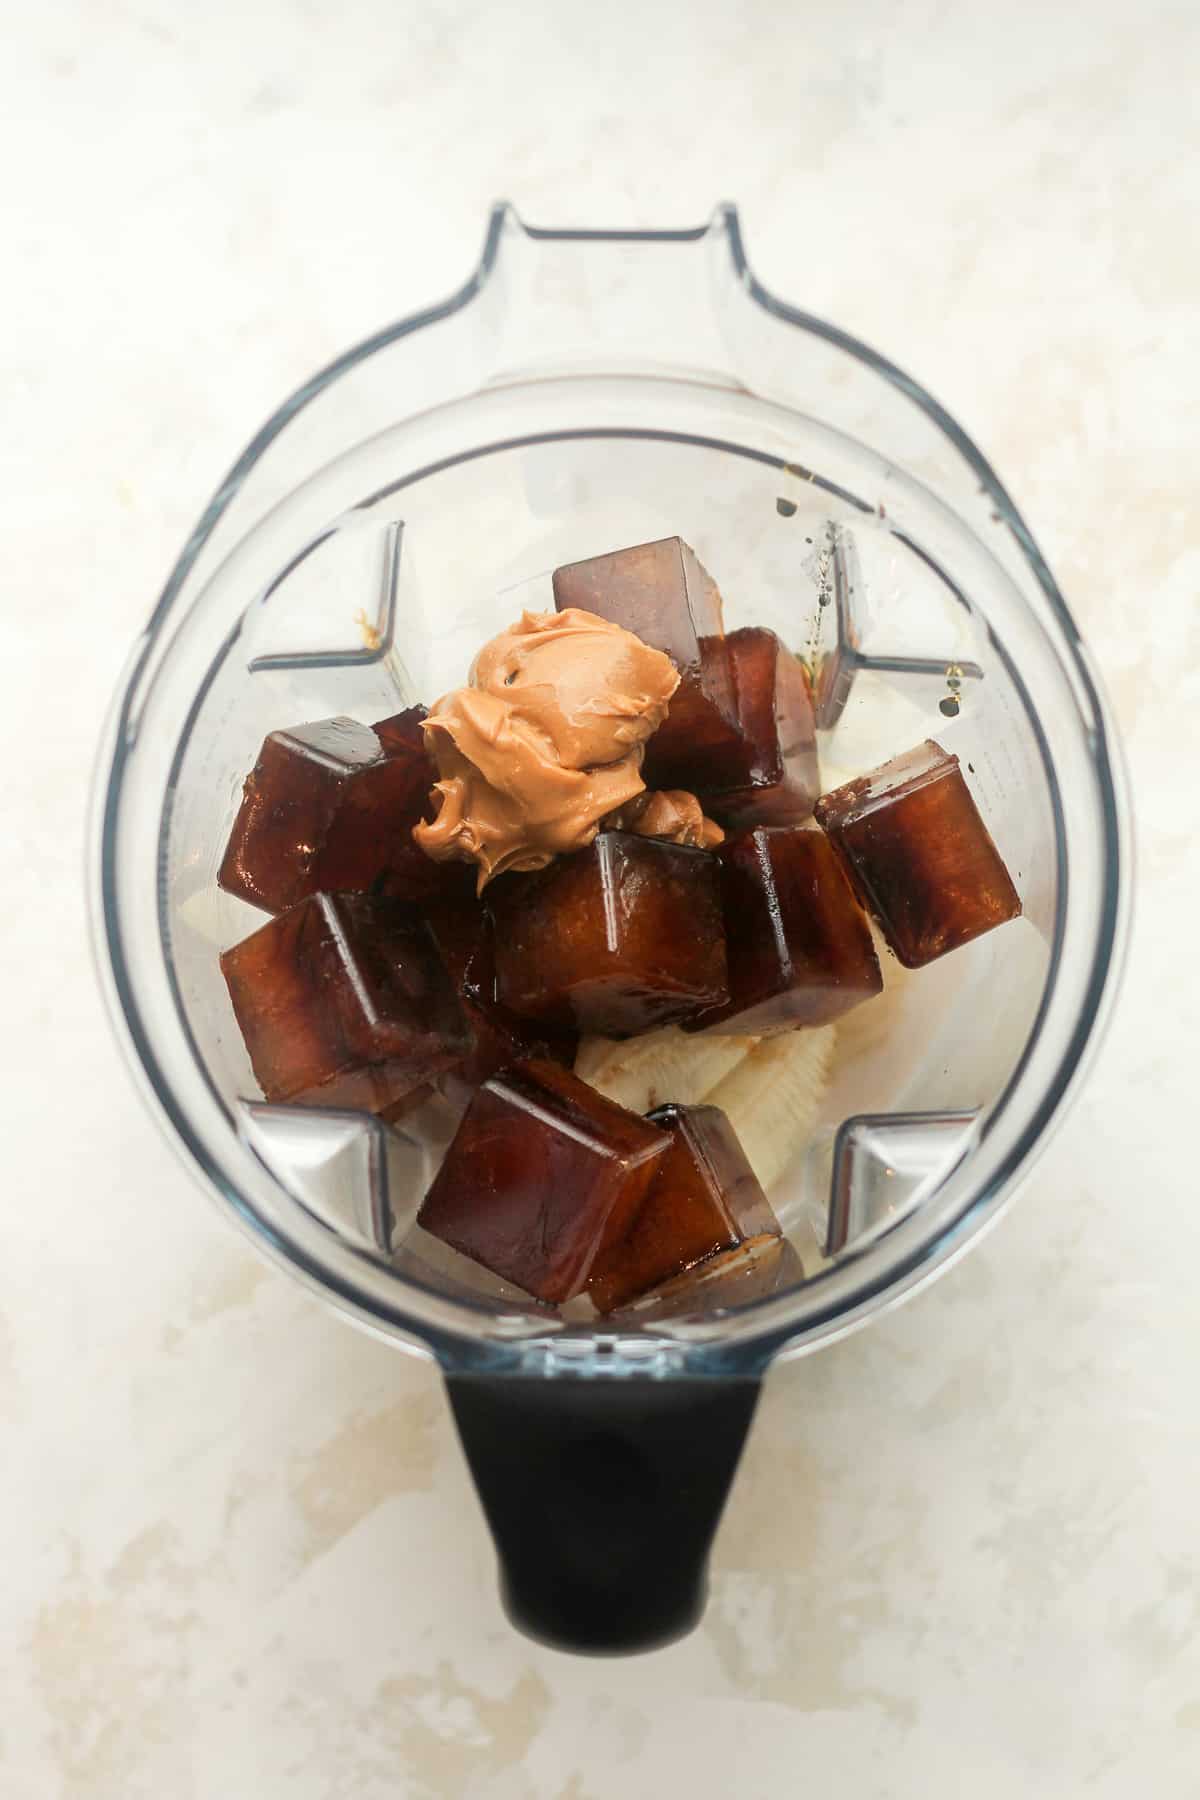 A blender full of the coffee smoothie ingredients, with coffee cubes and peanut butter on top.